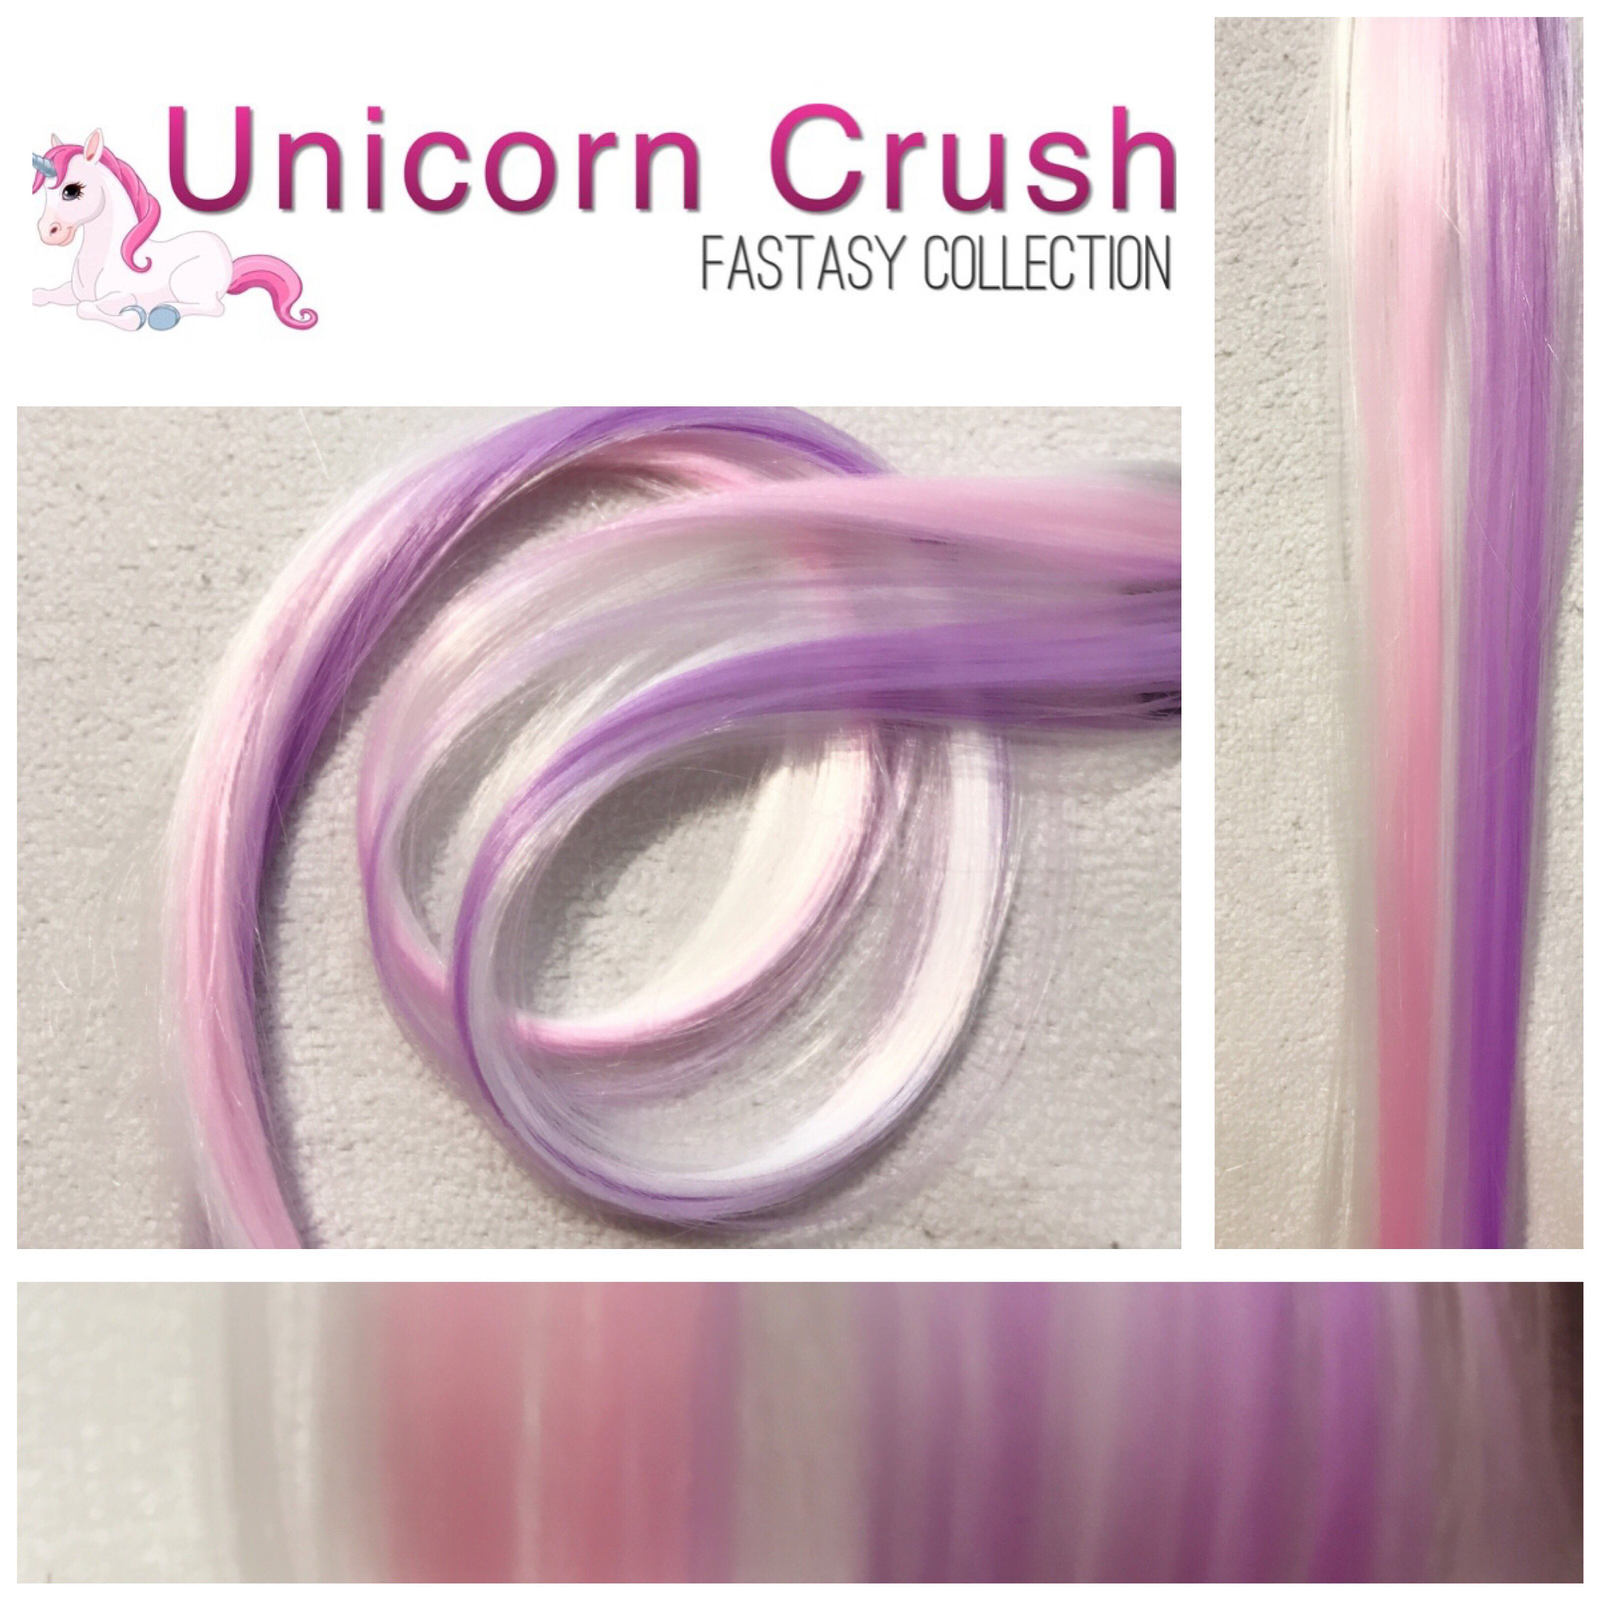 UNICORN CRUSH 18 Clip In Colored Hair Extension Set - 4 PIECES!